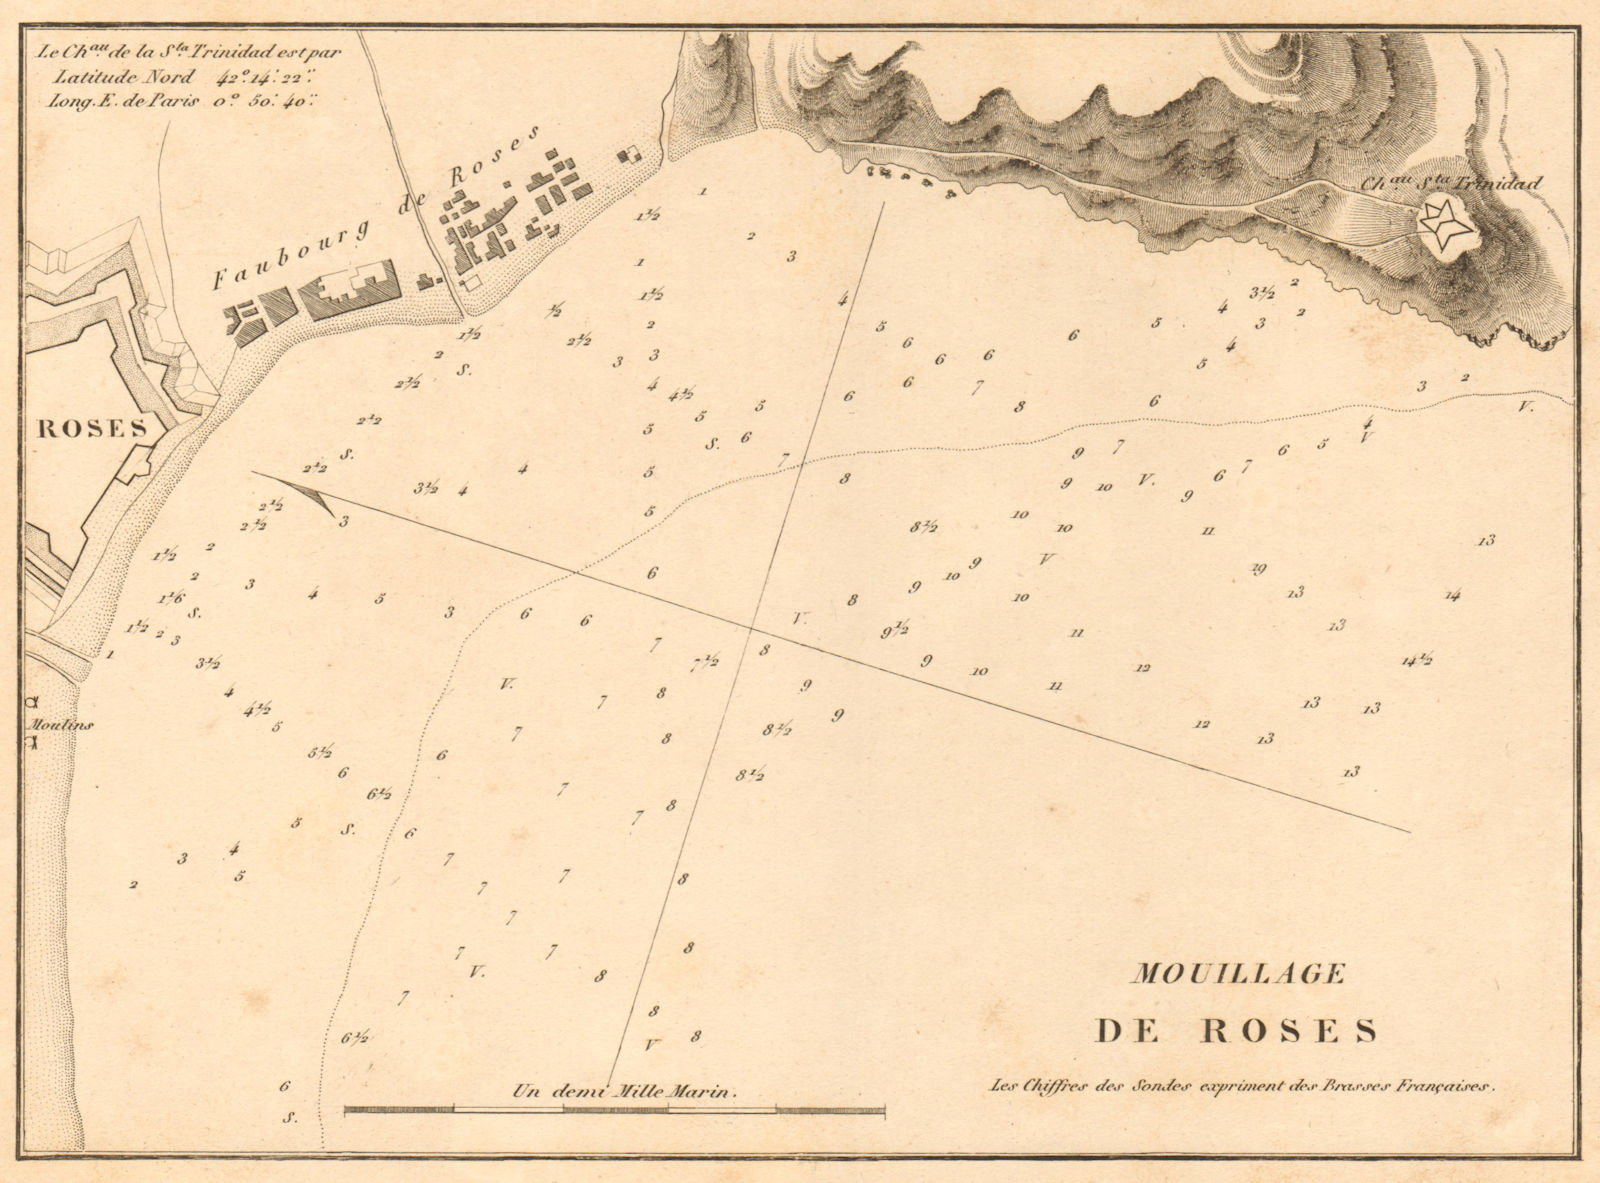 Anchorage of Roses. 'Mouillage de Roses'. Spain. Girona. GAUTTIER 1851 old map